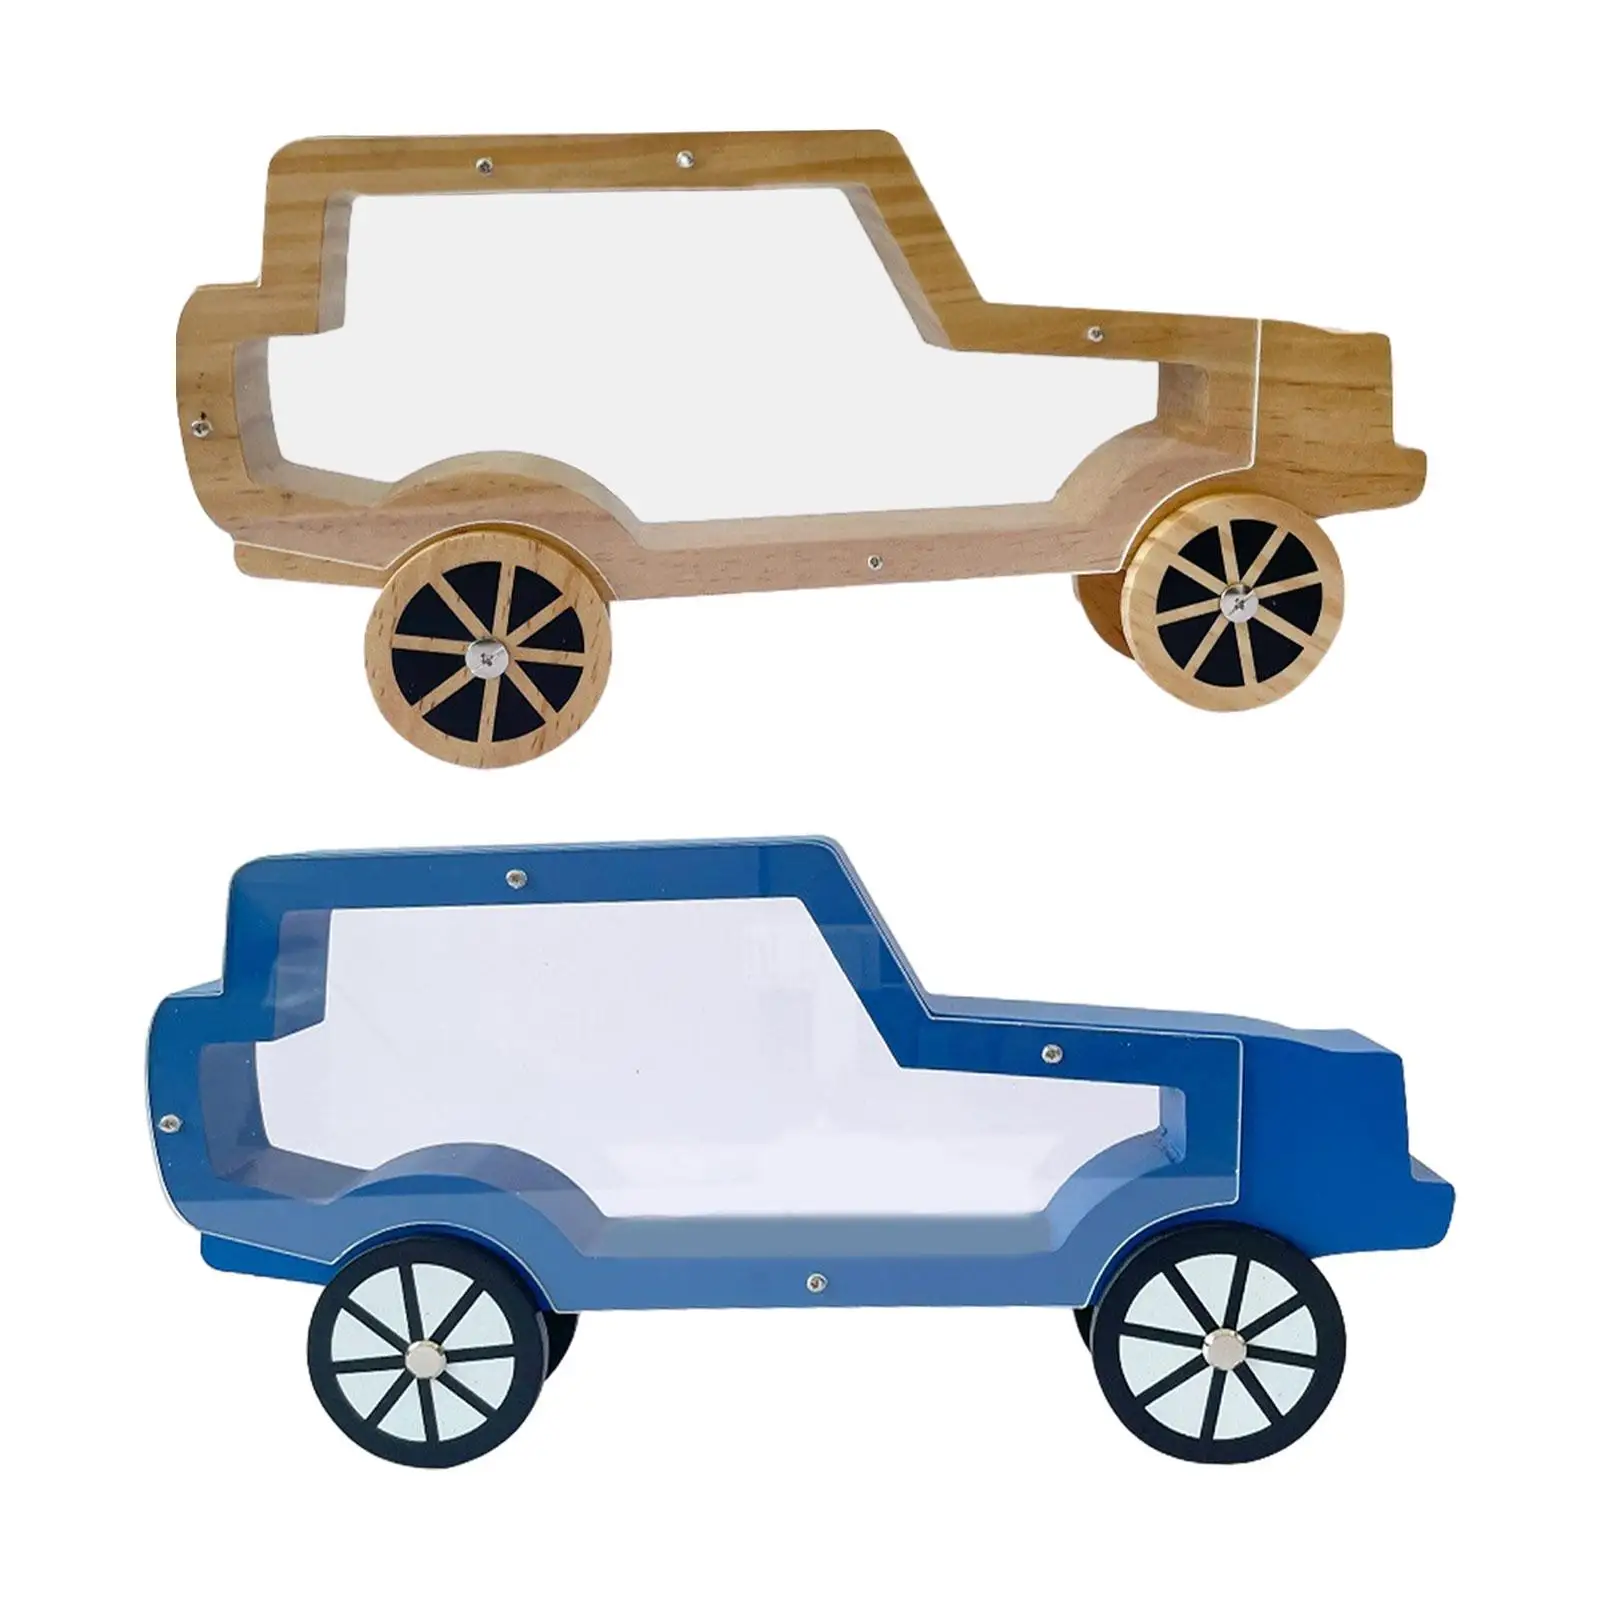 Wooden Creative Car Shaped Piggy Bank Visible Children Education Creative Tips Storage Case Money Box Container for Holiday Gift